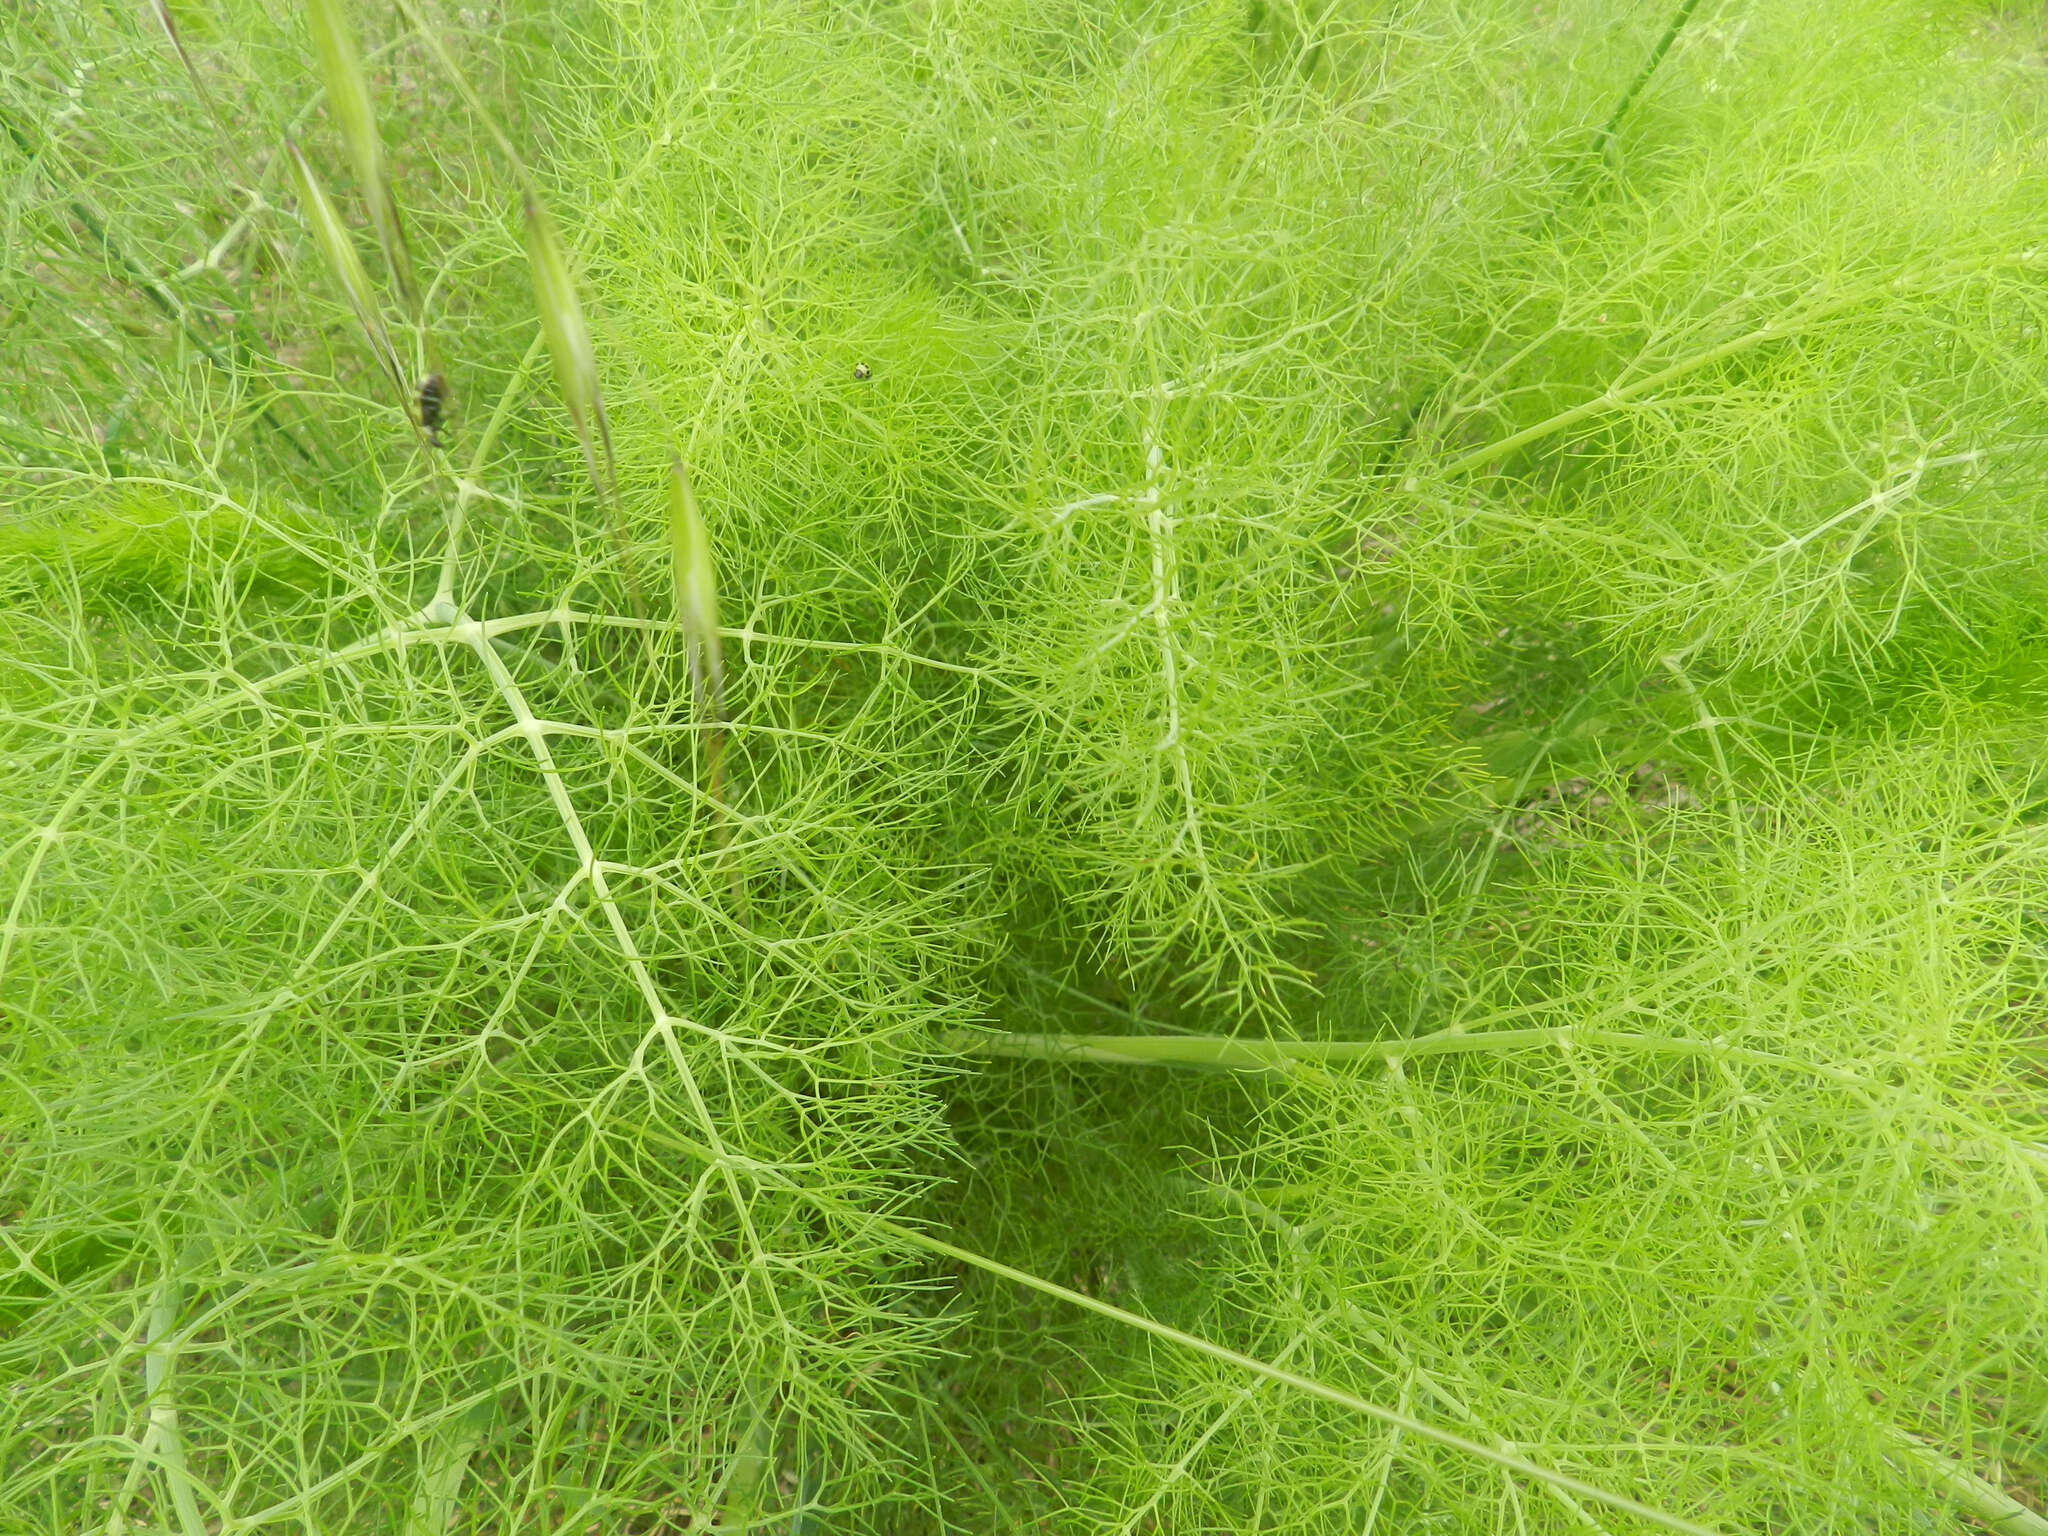 Image of Foeniculum vulgare var. dulce (Mill.) Cout.